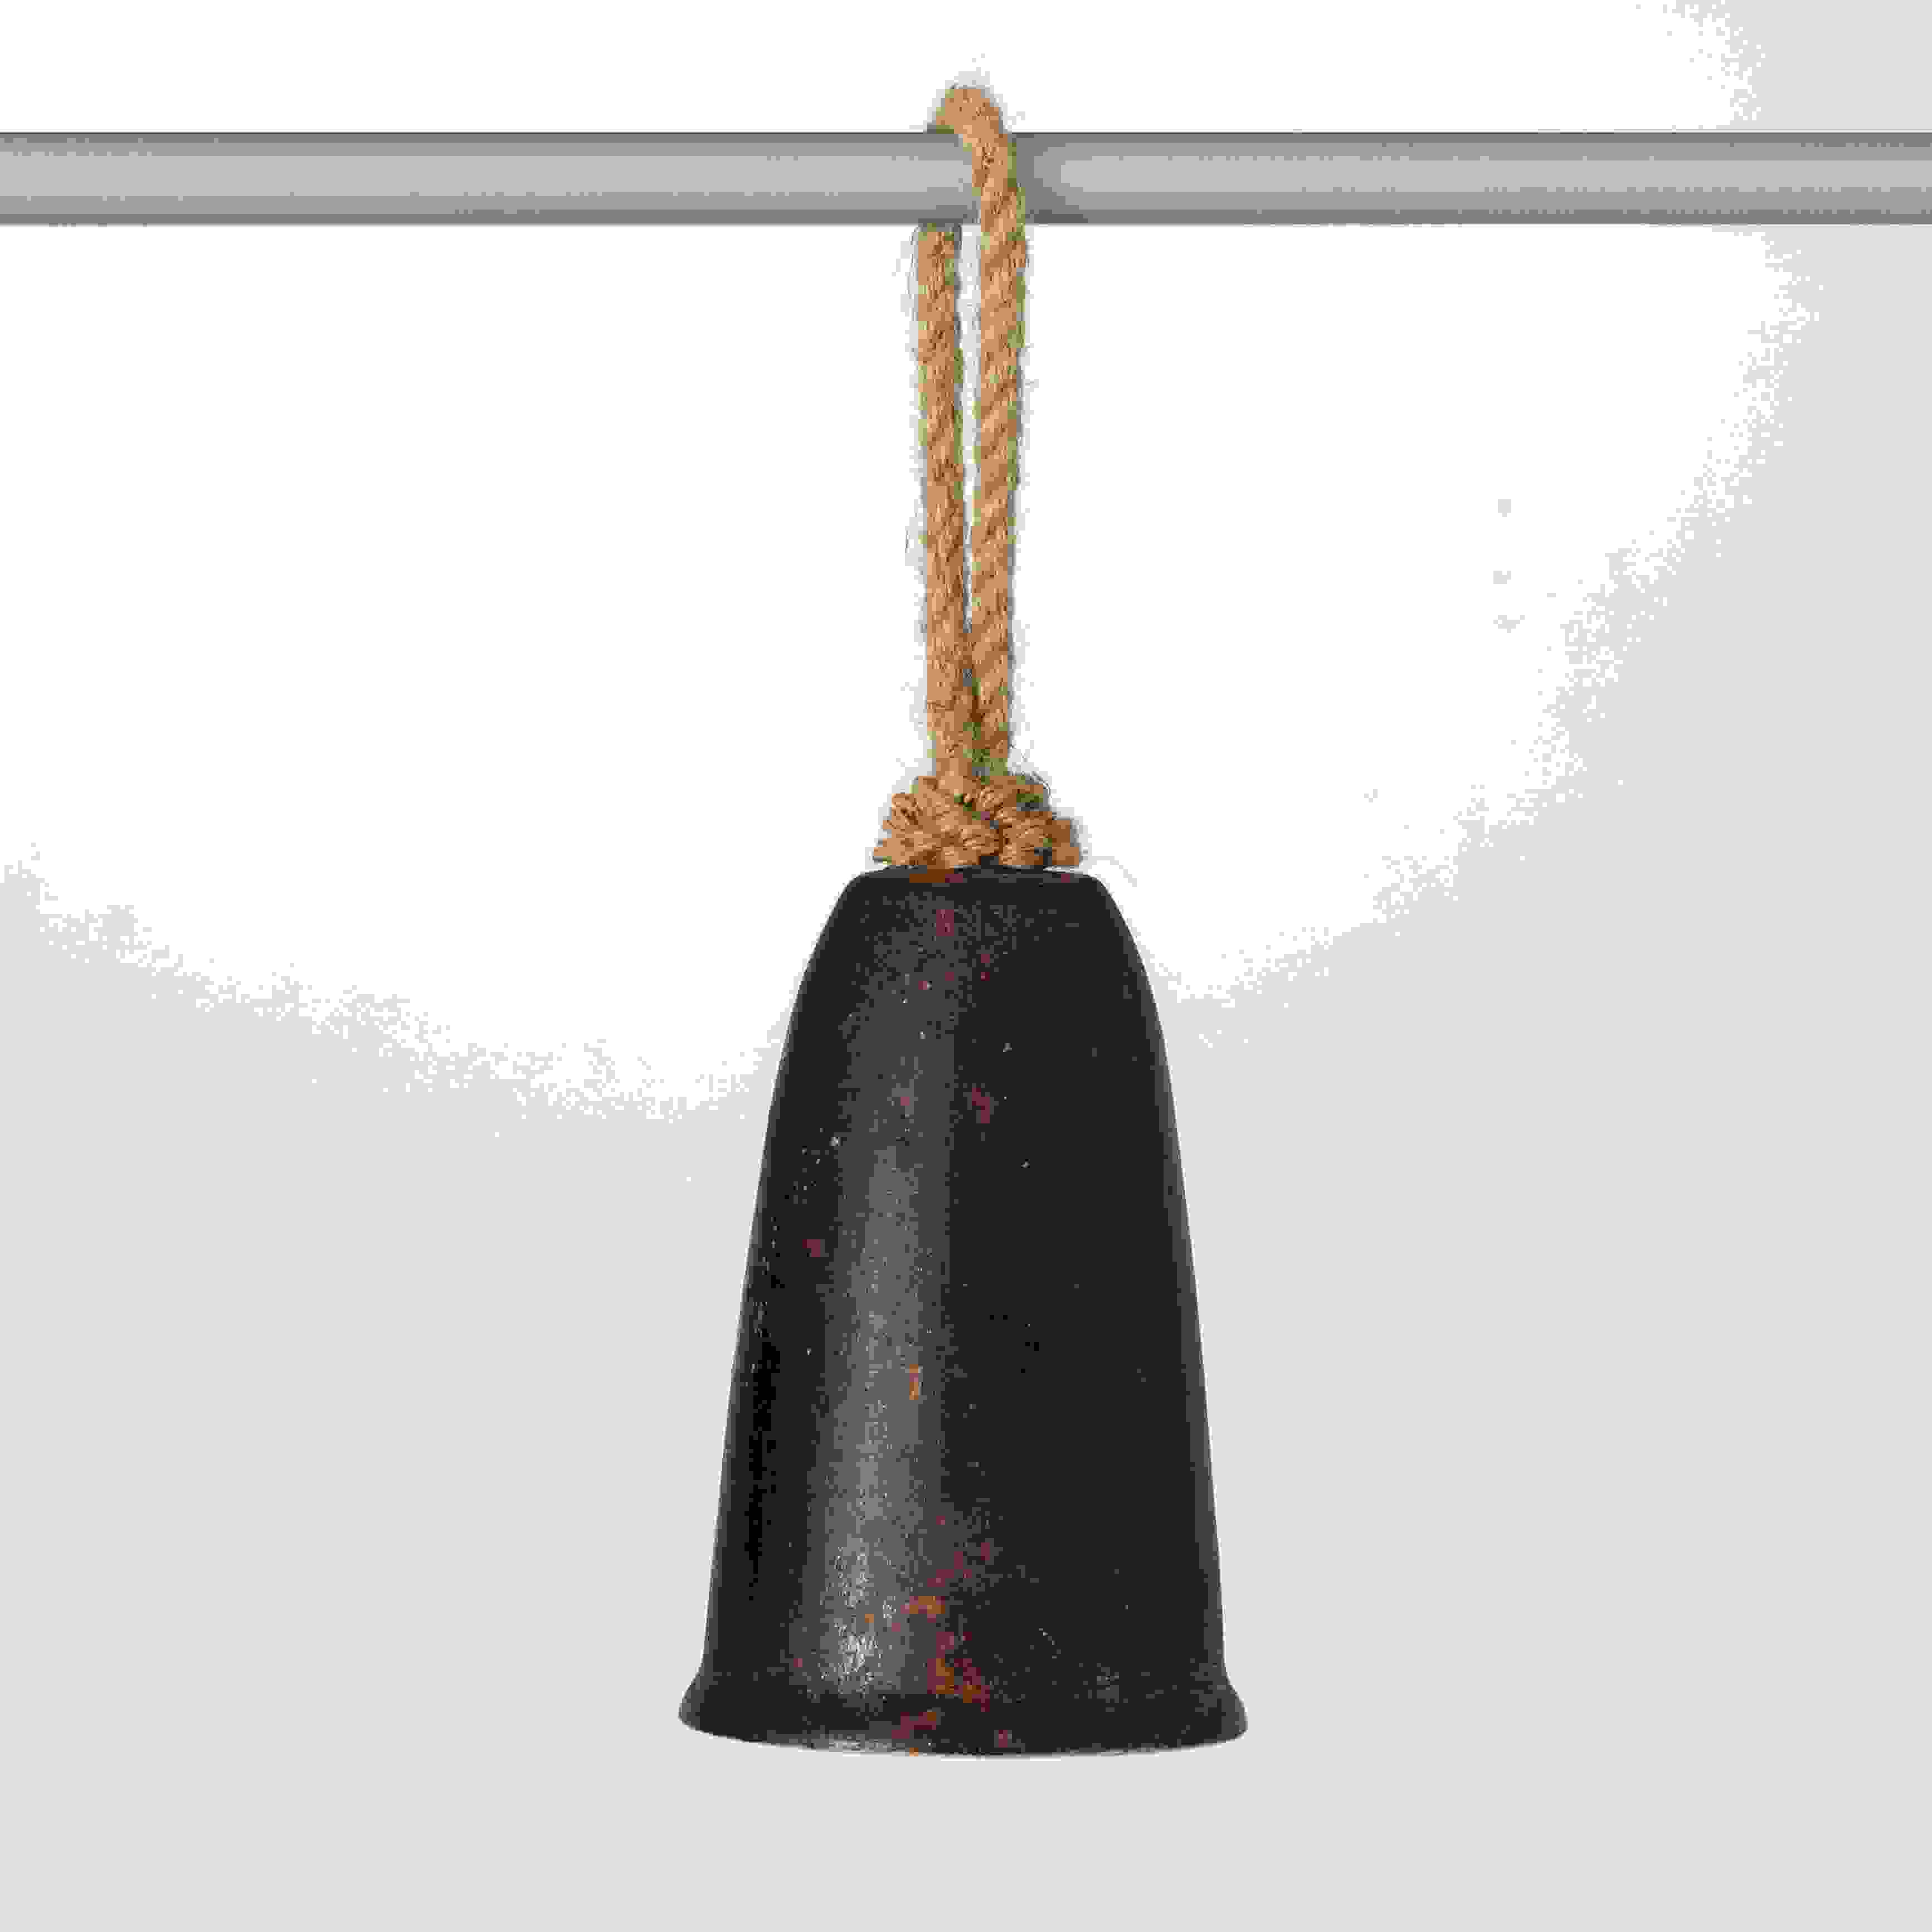 RUSTIC BELL ORNAMENT WITH ROPE